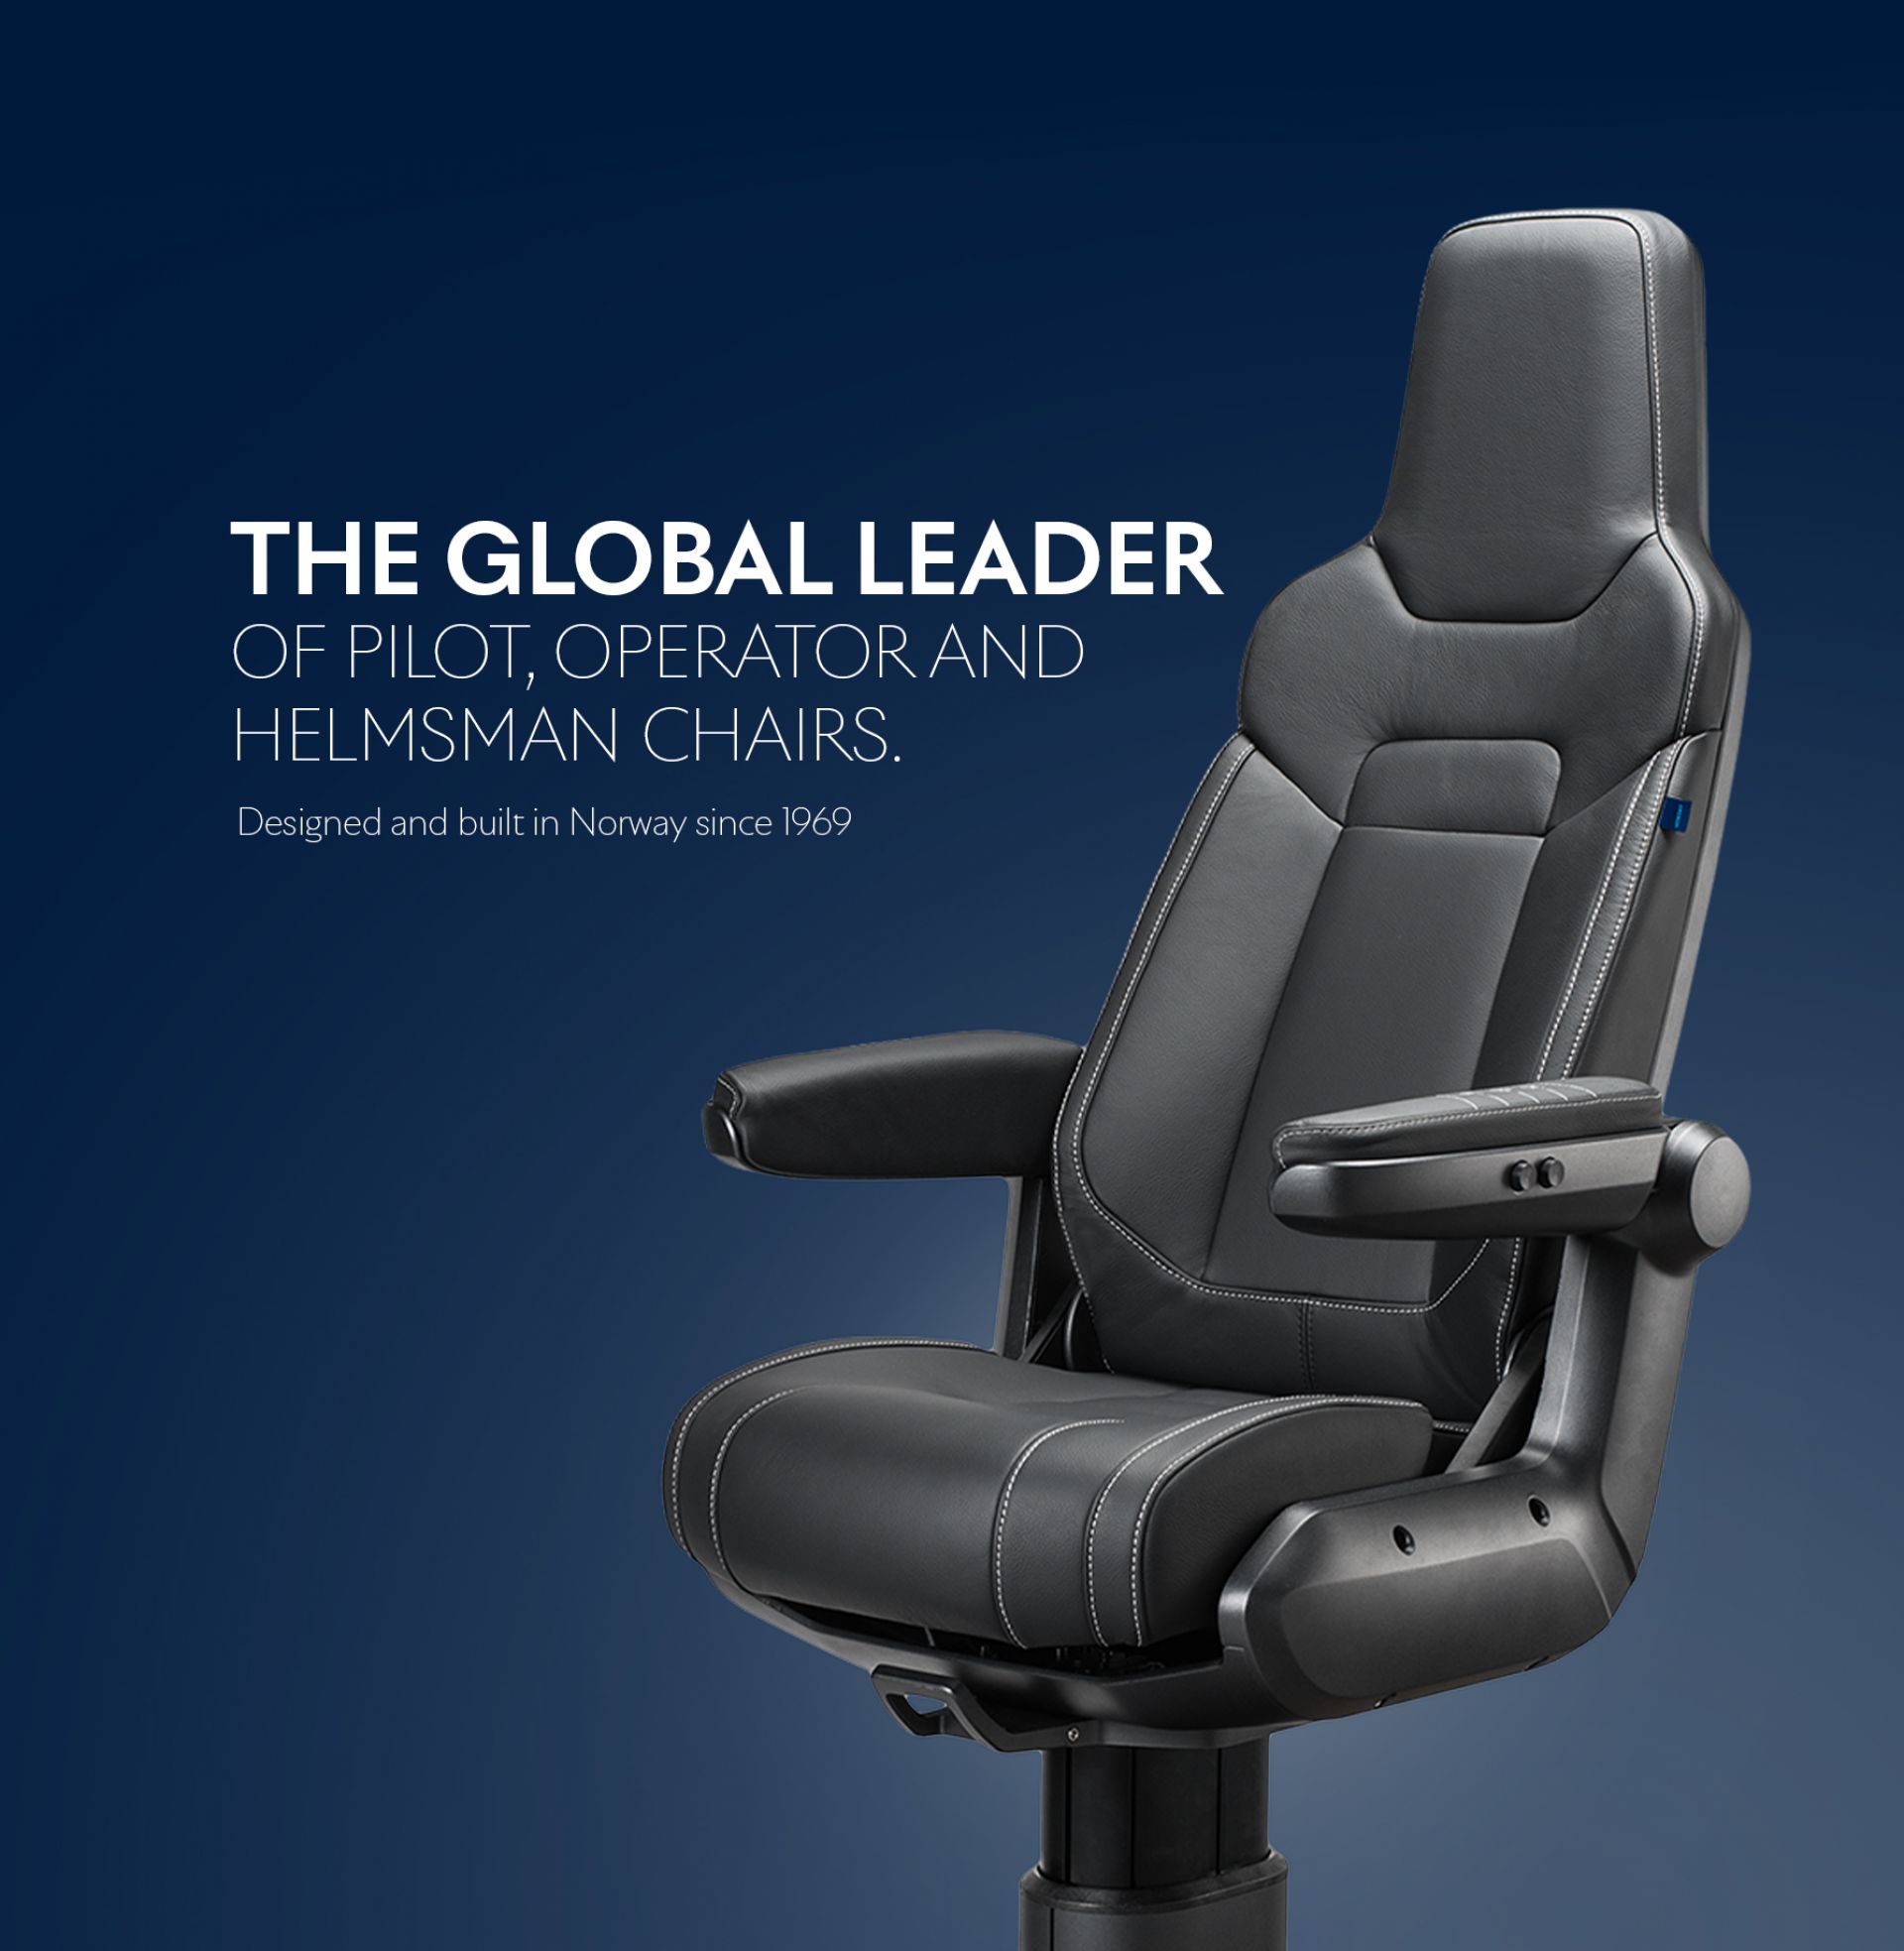 The Global Leader of Pilot, Operator and Helmsman chairs.- Norwegian design and aluminium manufacture since 1969